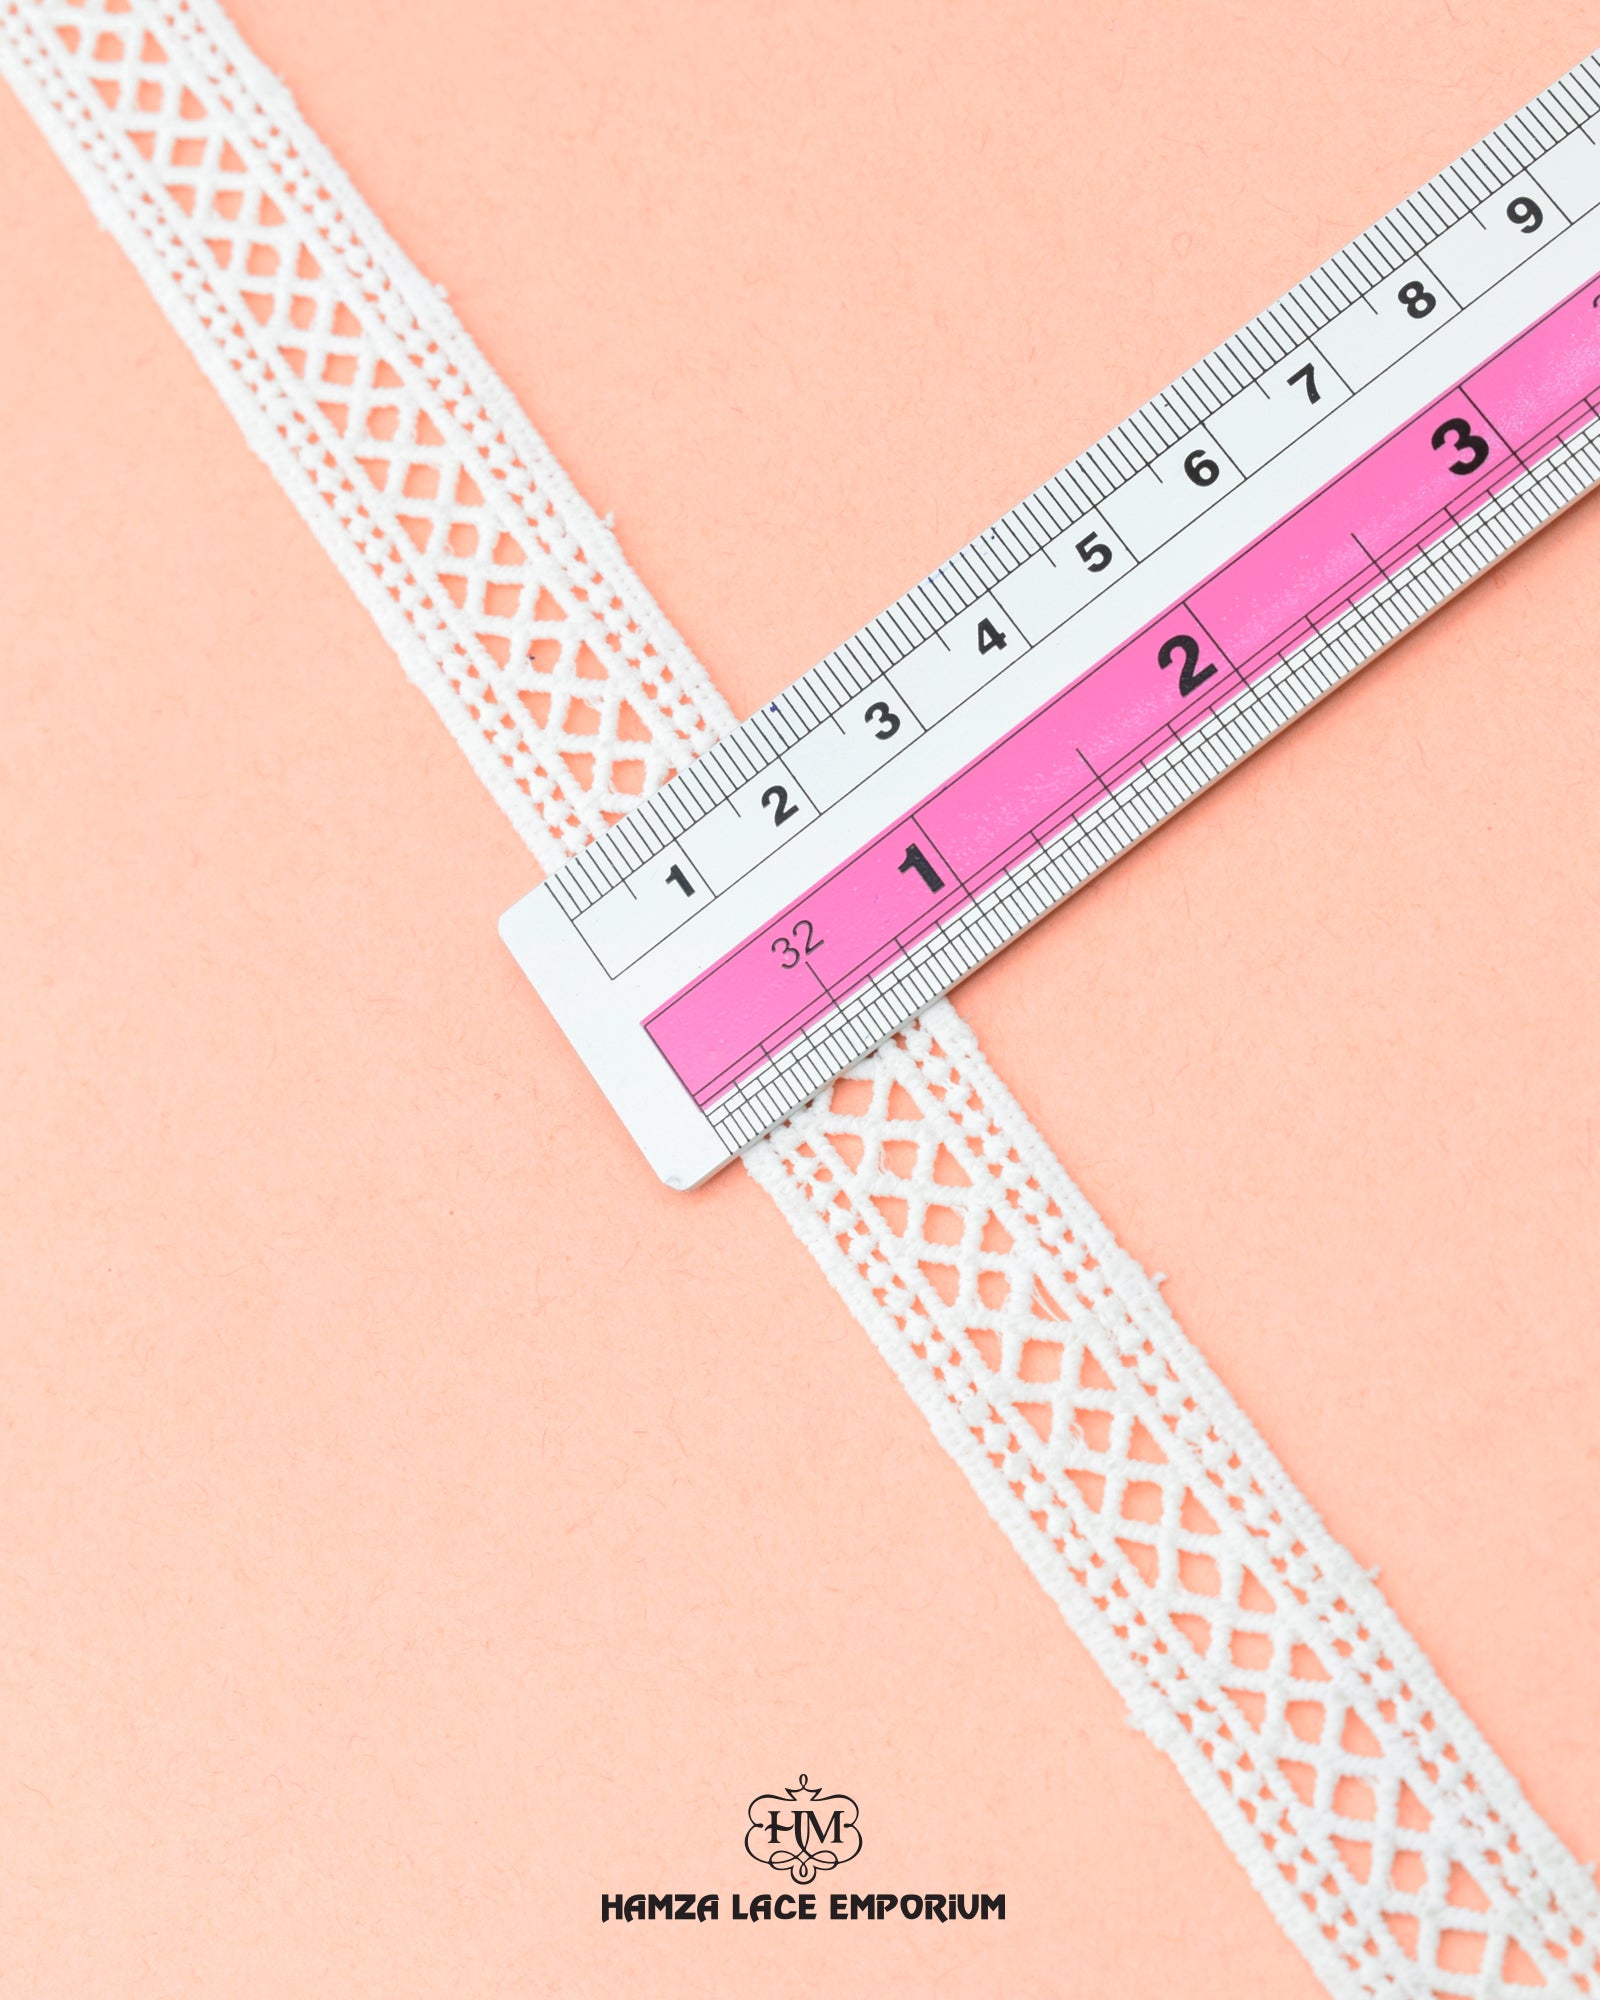 Size of the 'Center Filling Lace 2463' is shown with the help of a ruler as '0.75' inches